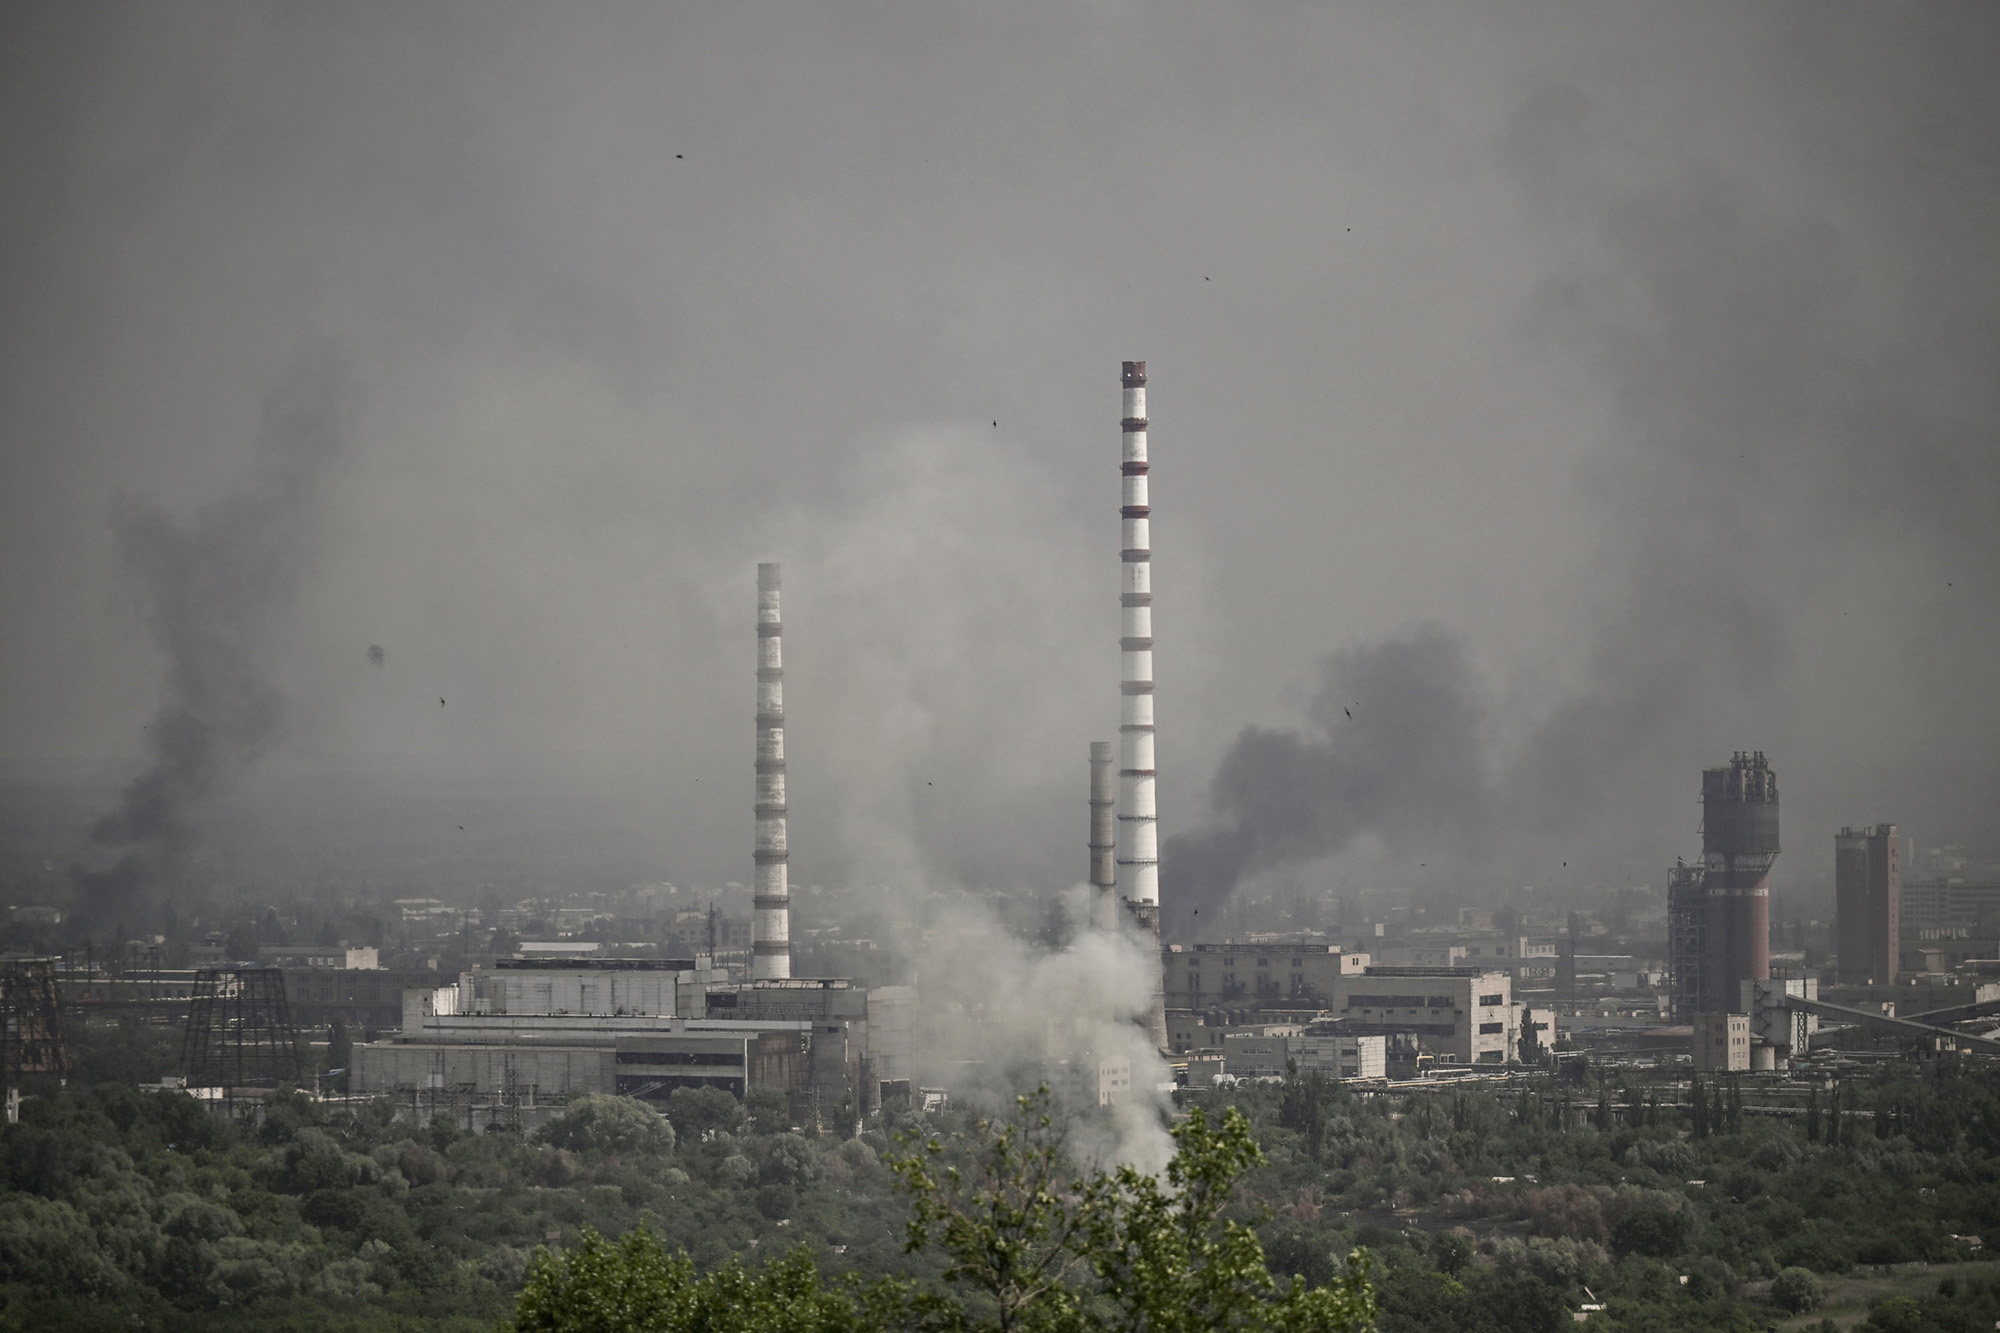 Smoke and dirt rise from the city of Severodonetsk, Ukraine, during fighting on June 14.